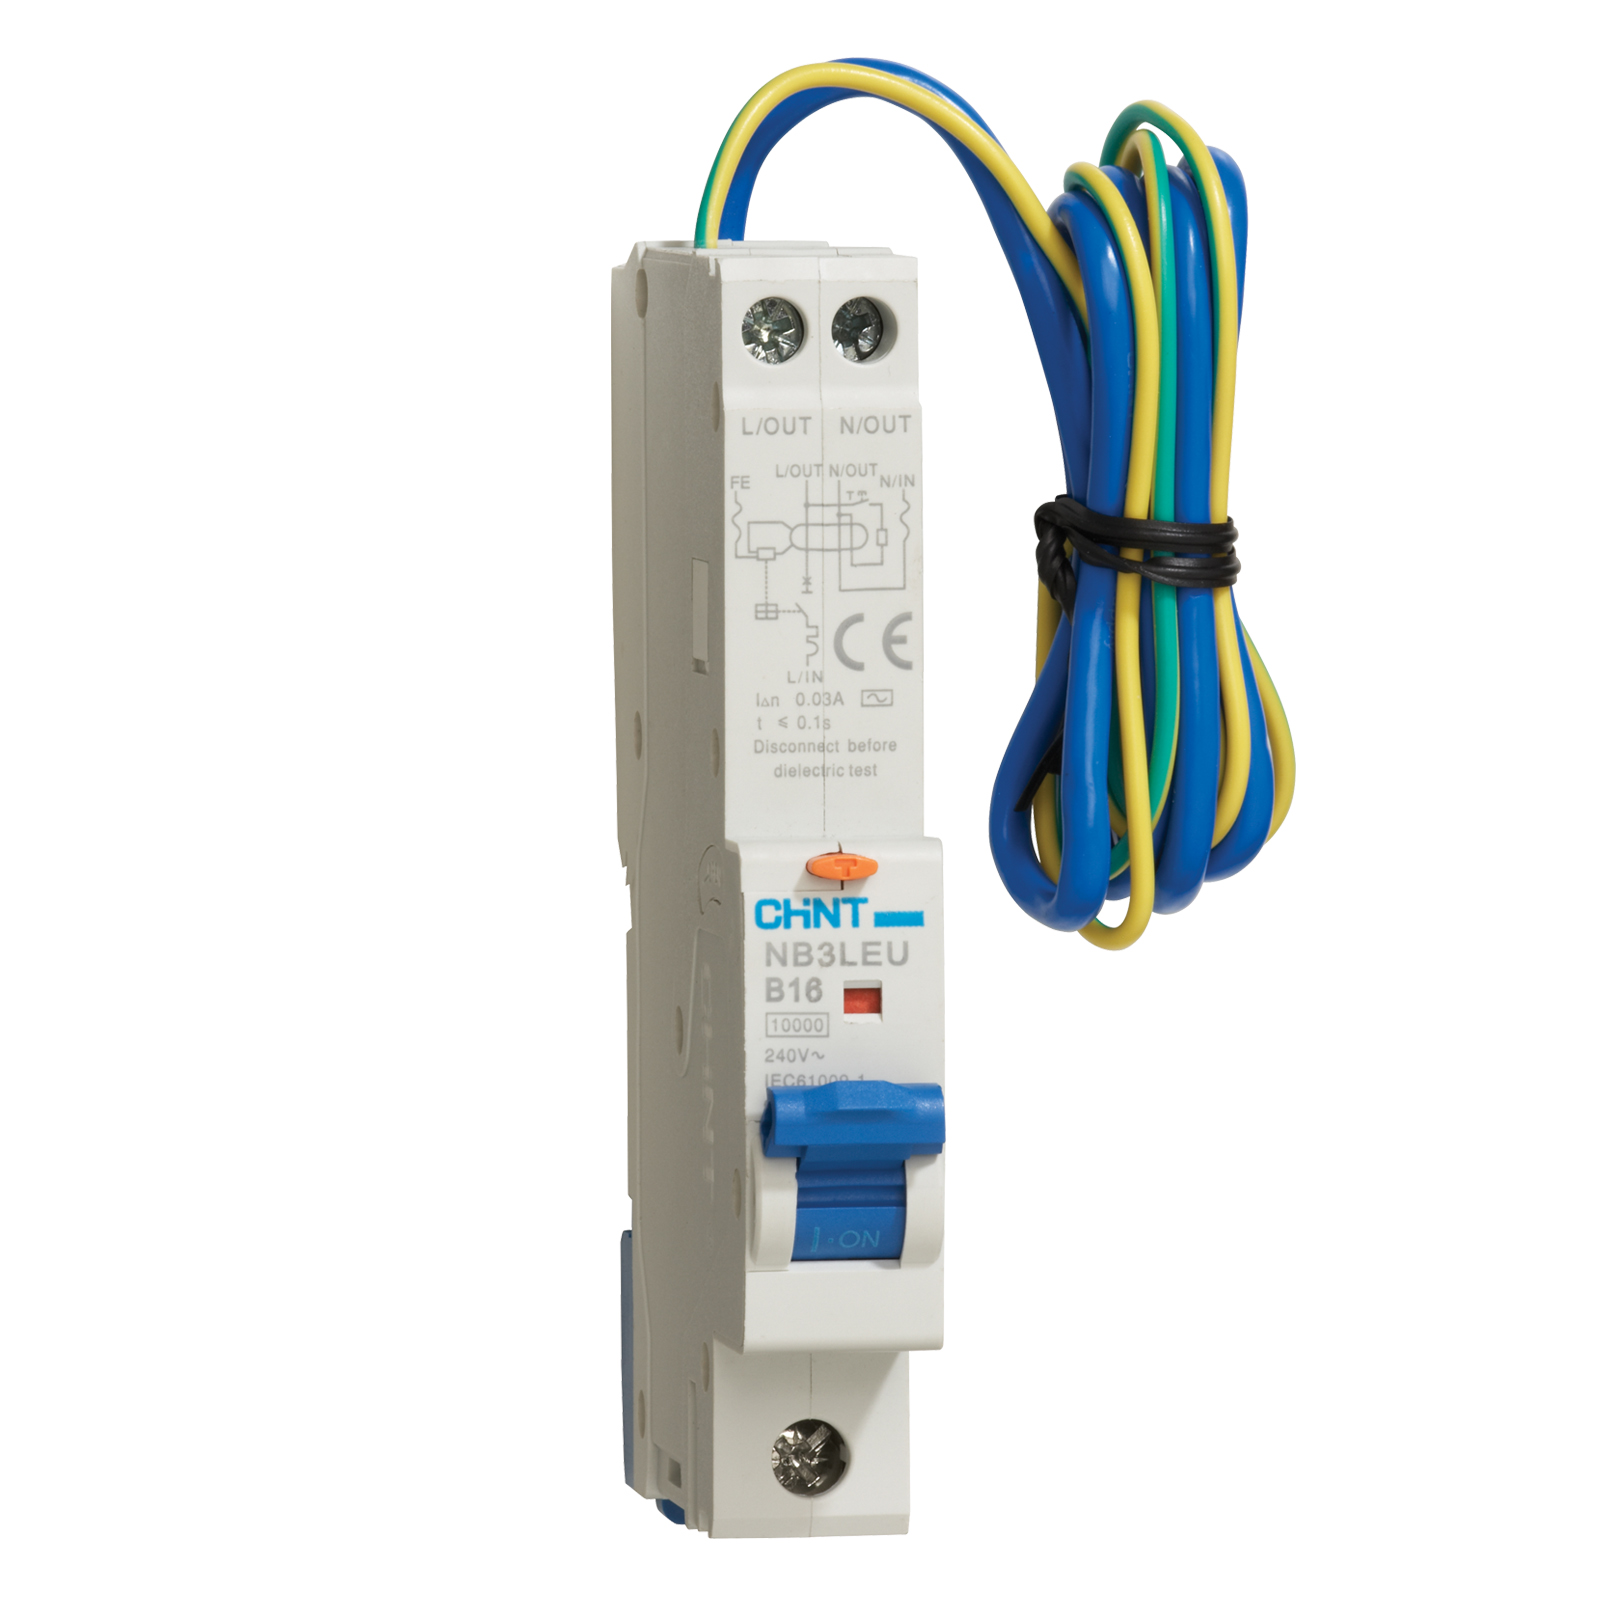 Residual Current Operated Circuit Breaker With Over-current Protection (Electronic), NB3LEU Series